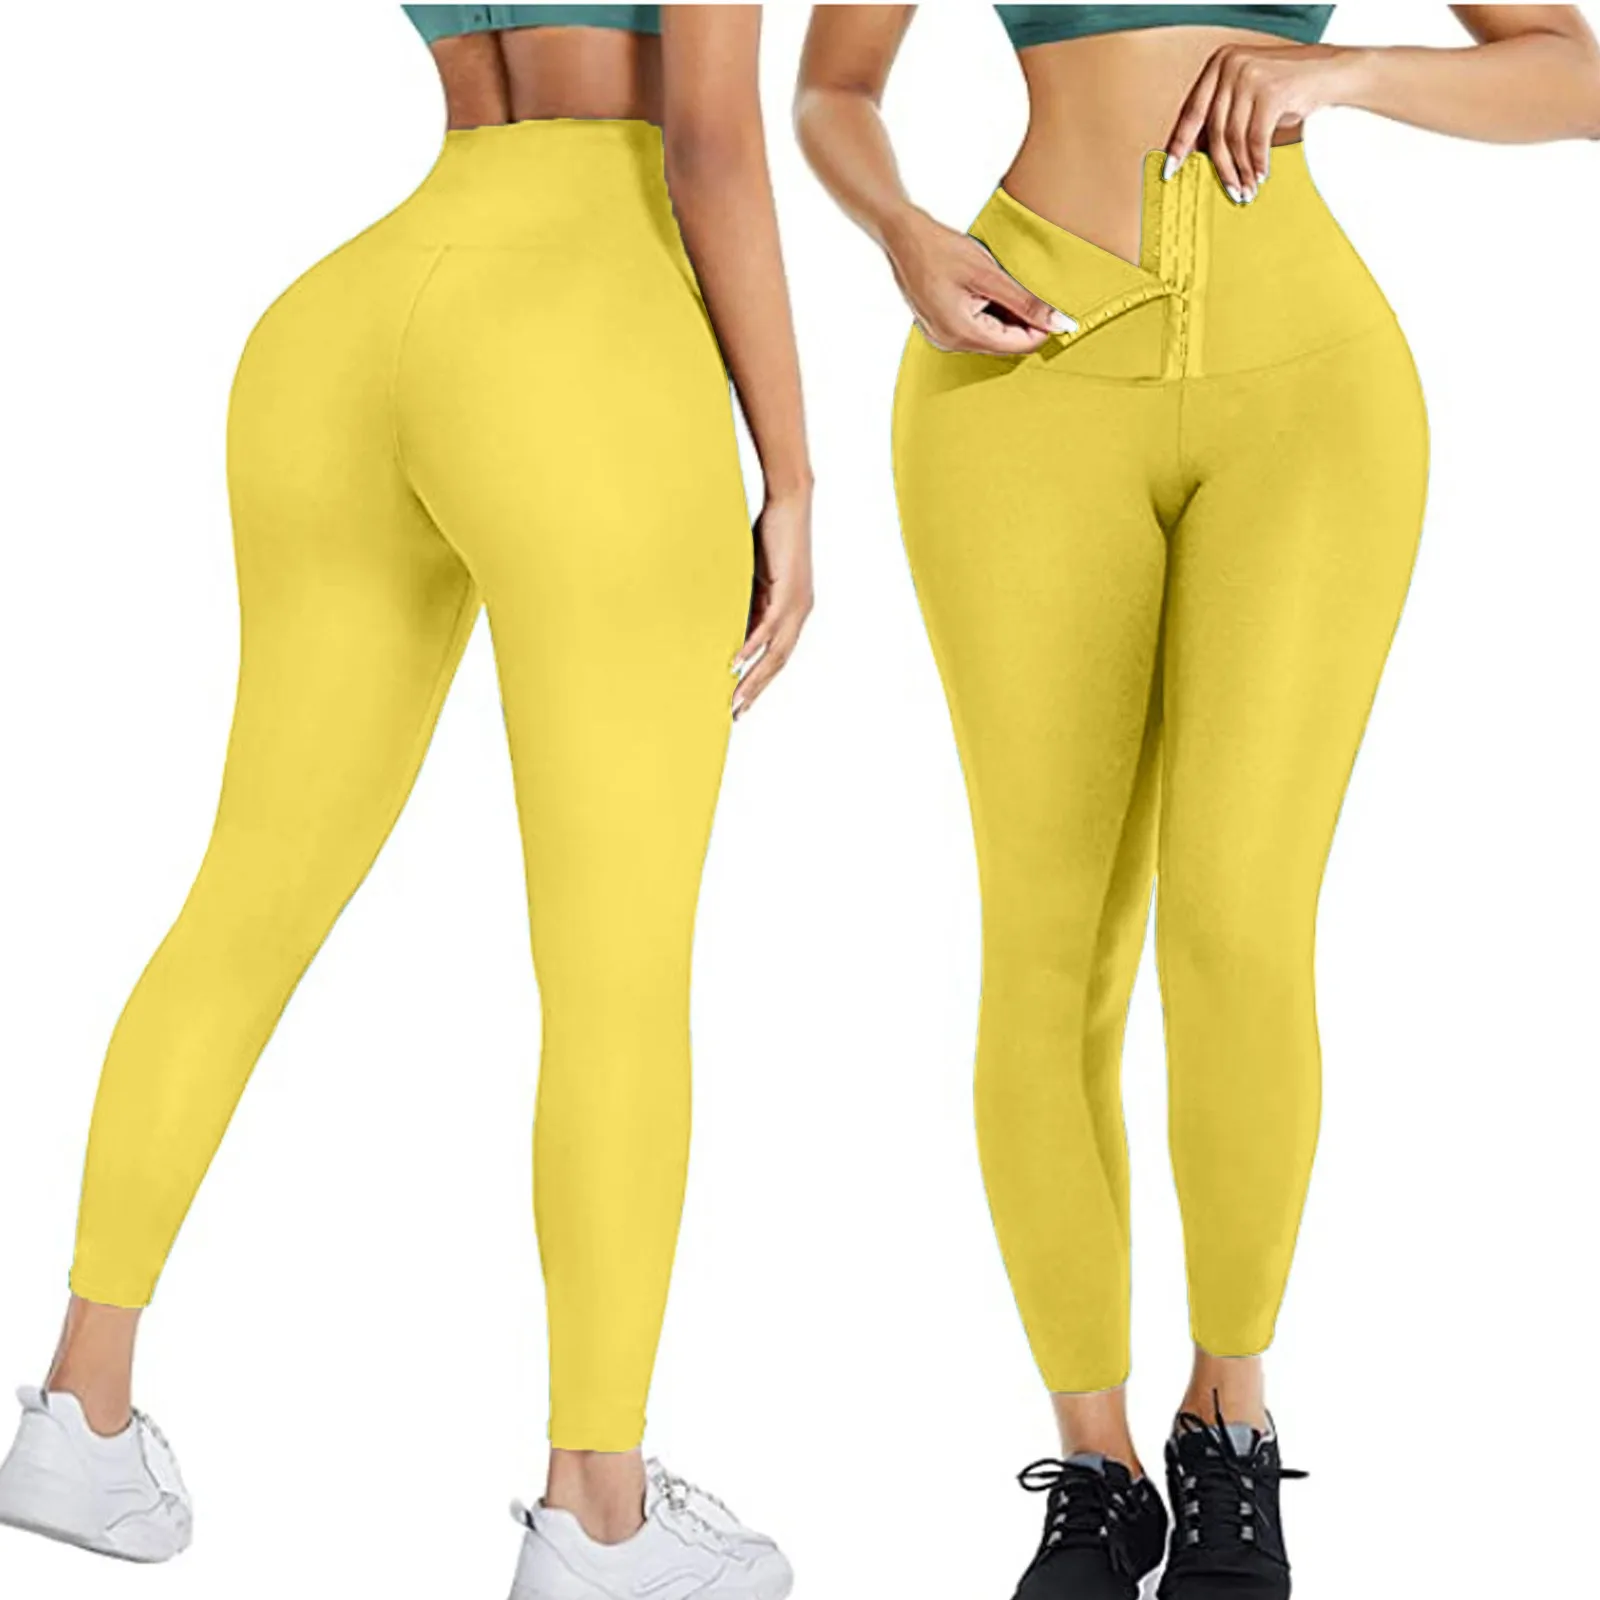 spanx leggings Push Up Seamless Leggings Plus Size Tights For Women Casual Solid Pants Women Sports Trousers Fitness Woman Legging Pant Sexi brown leggings